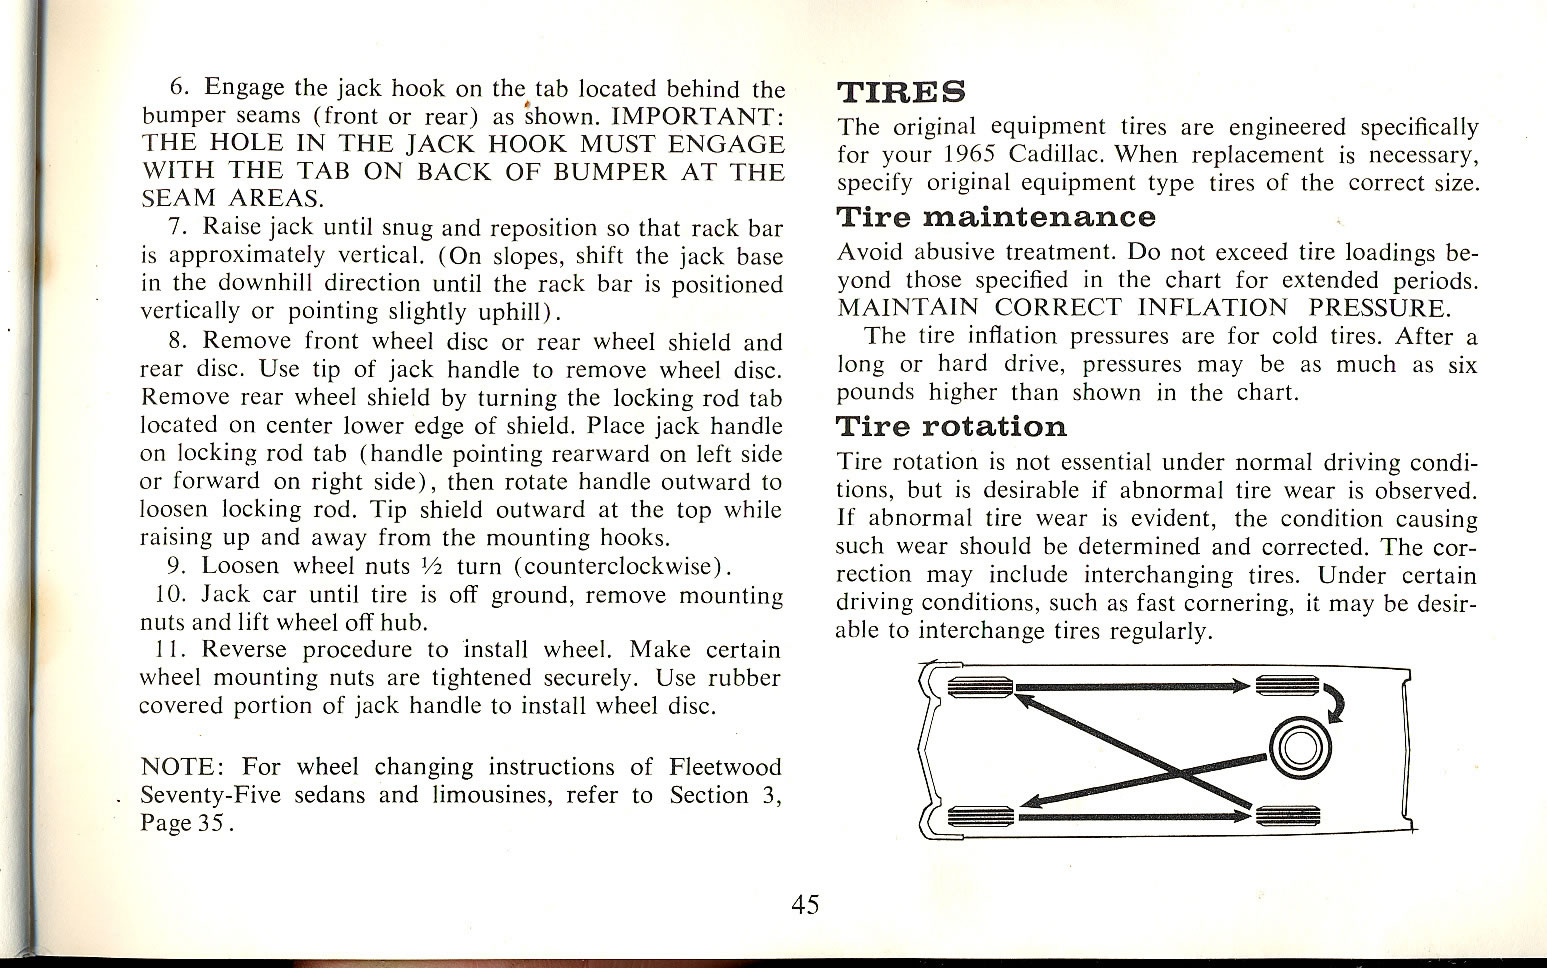 1965 Cadillac Owners Manual Page 21